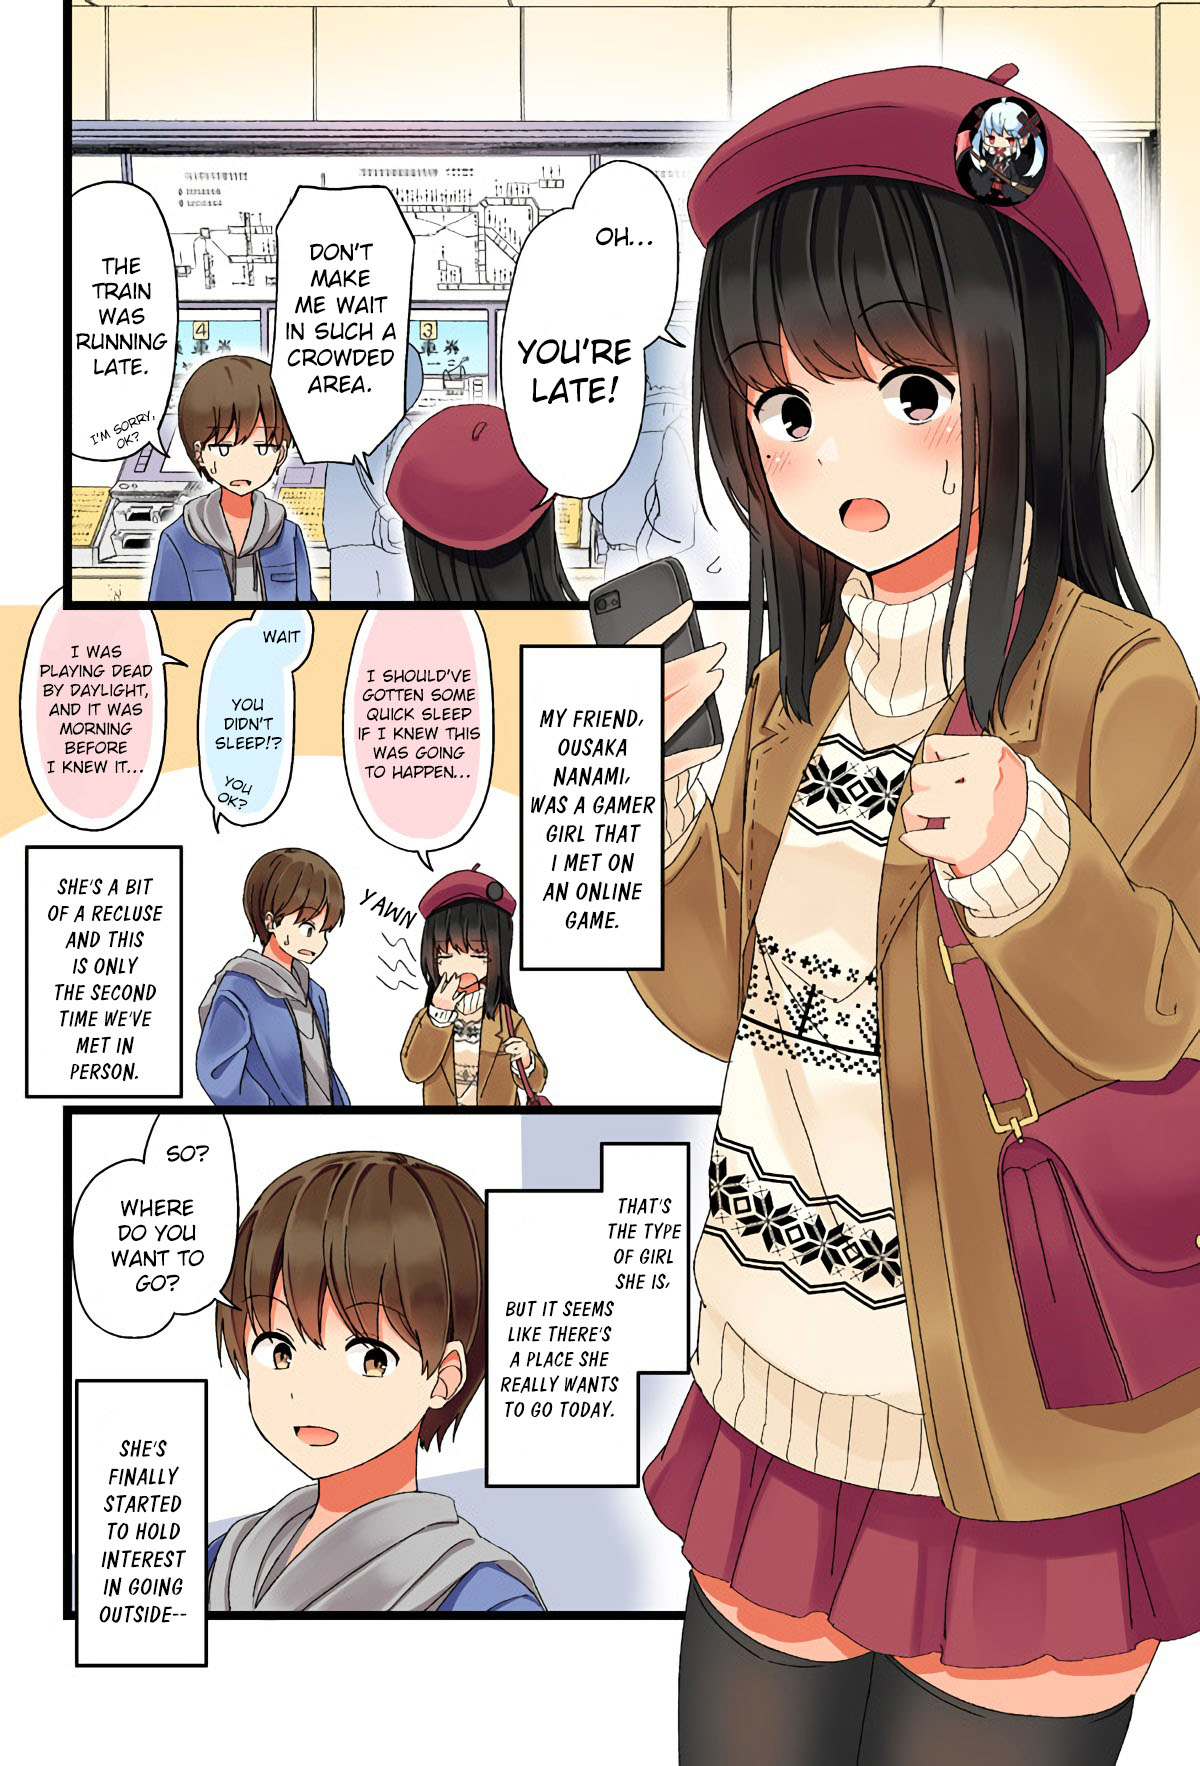 Hanging Out With A Gamer Girl Ch. 2 I Go To The Arcade With My Gamer Friend (1)